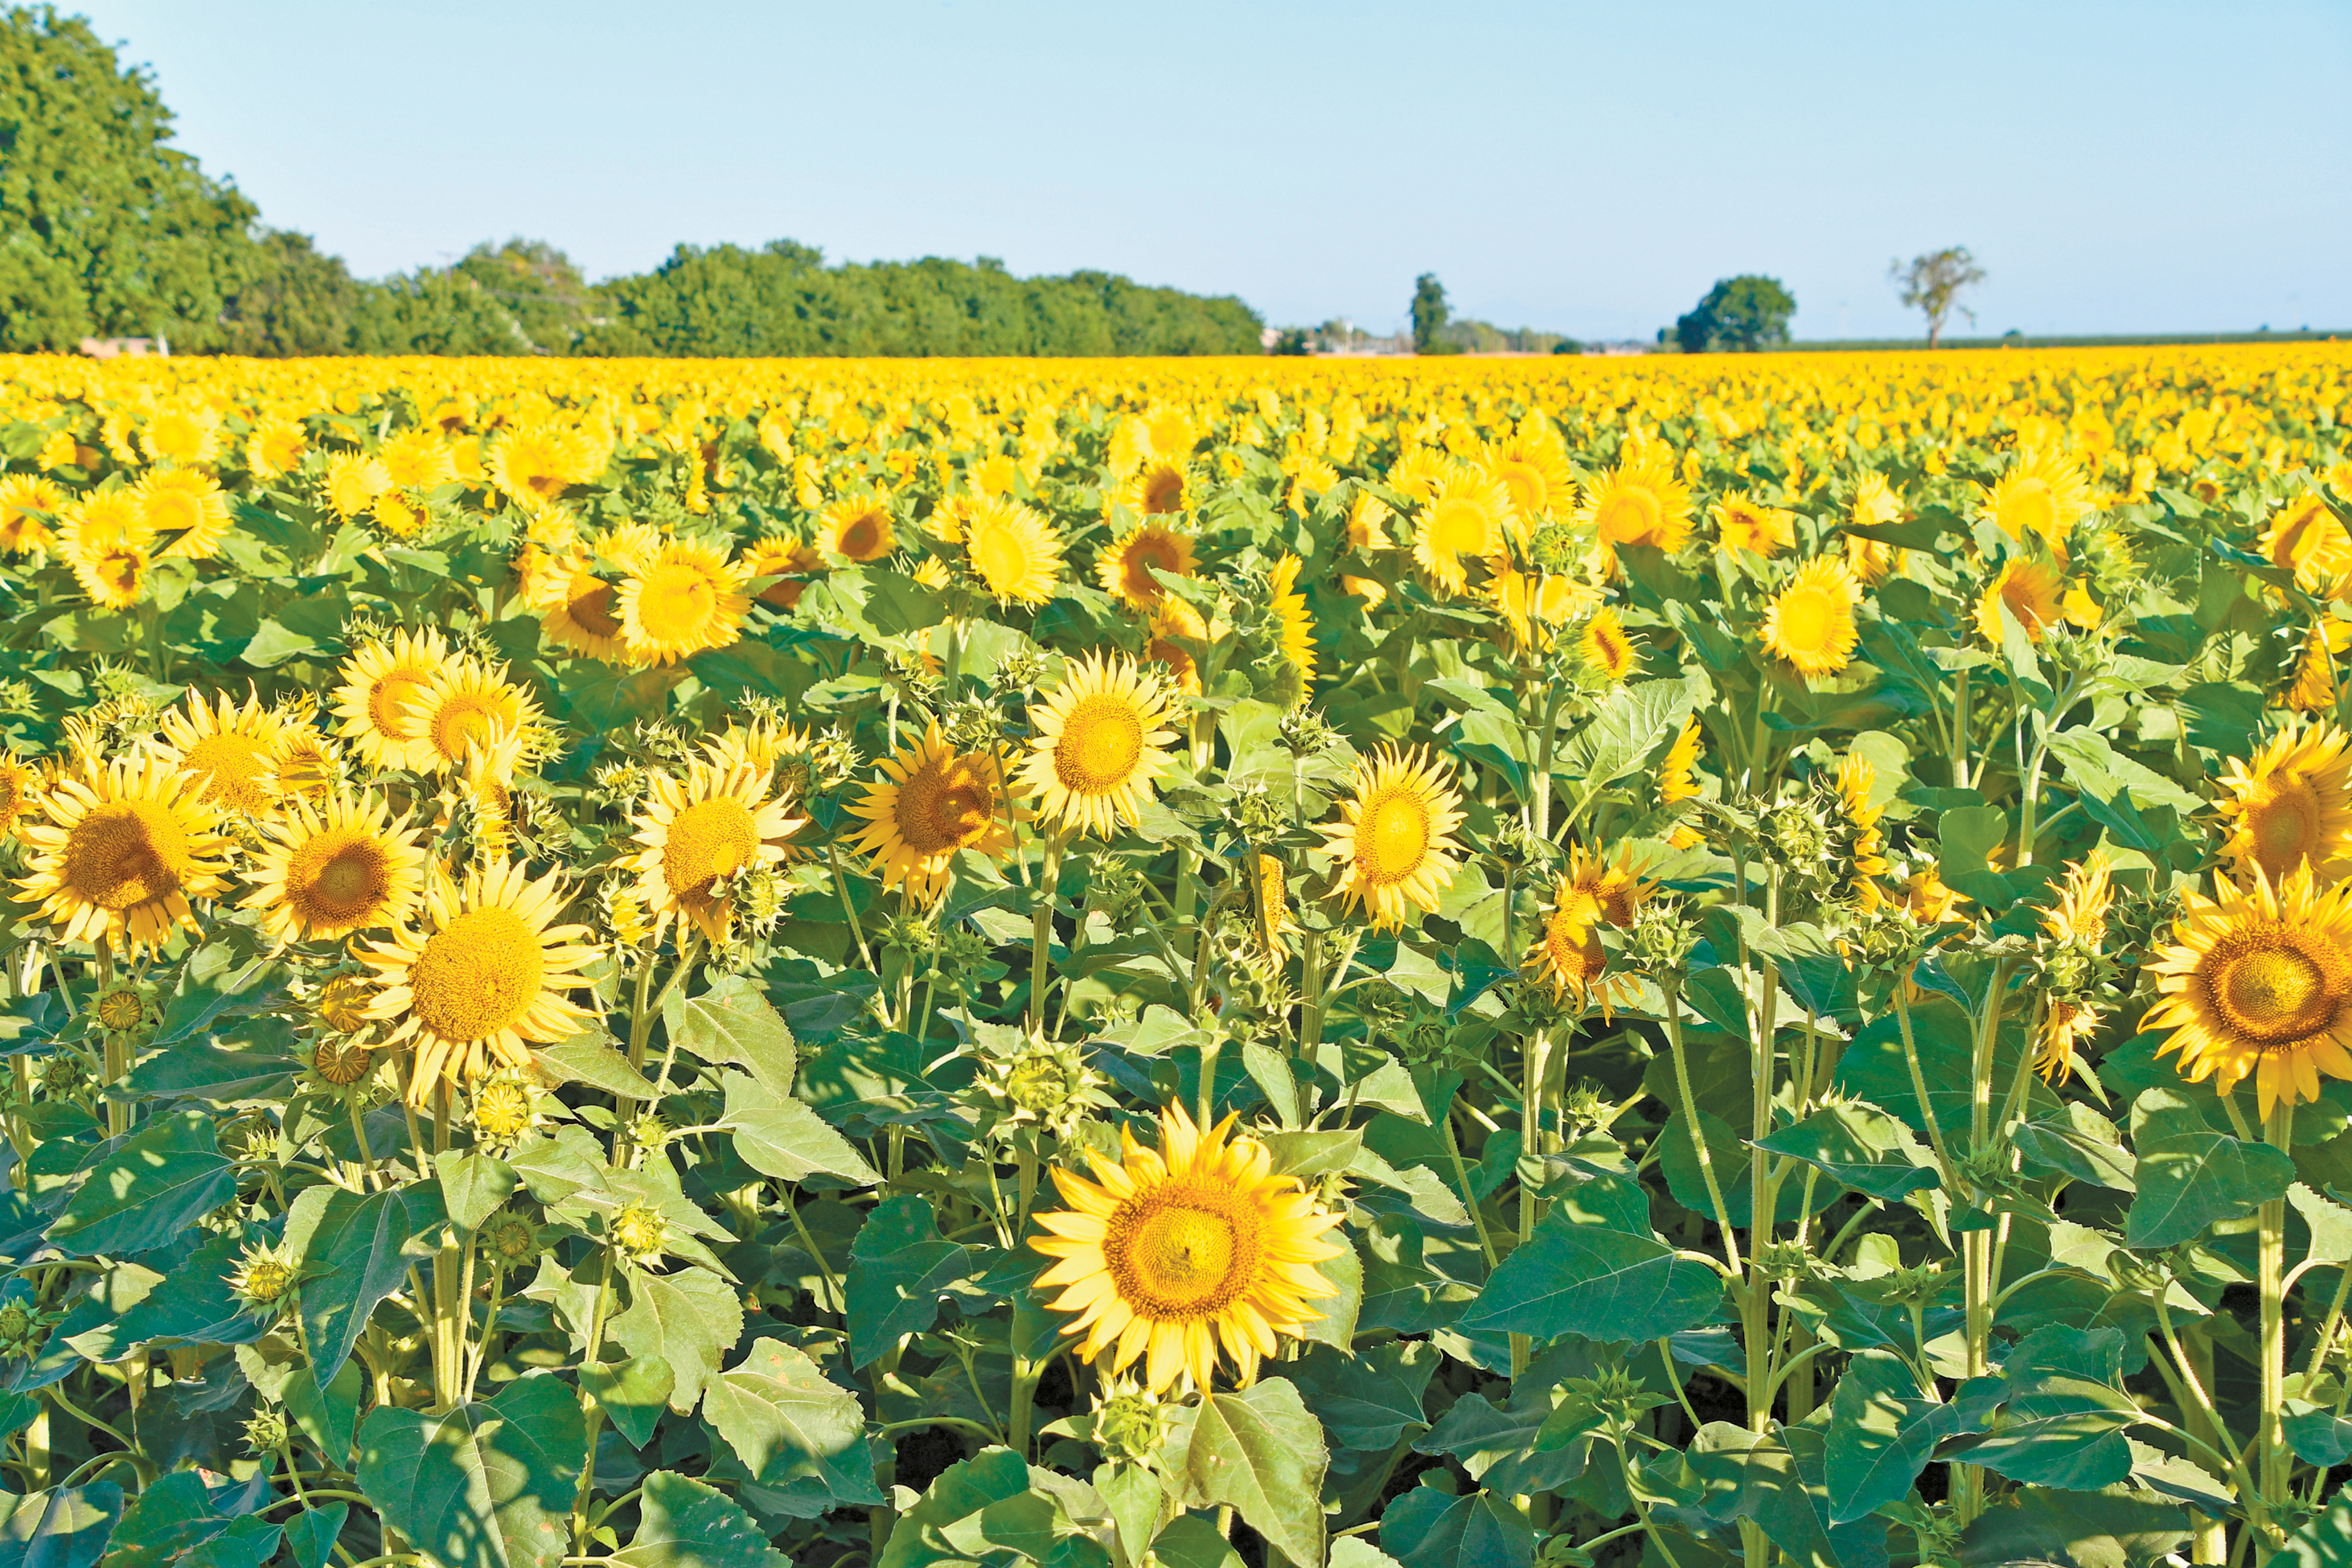 Sunflower seed firms leave state, impacting growers